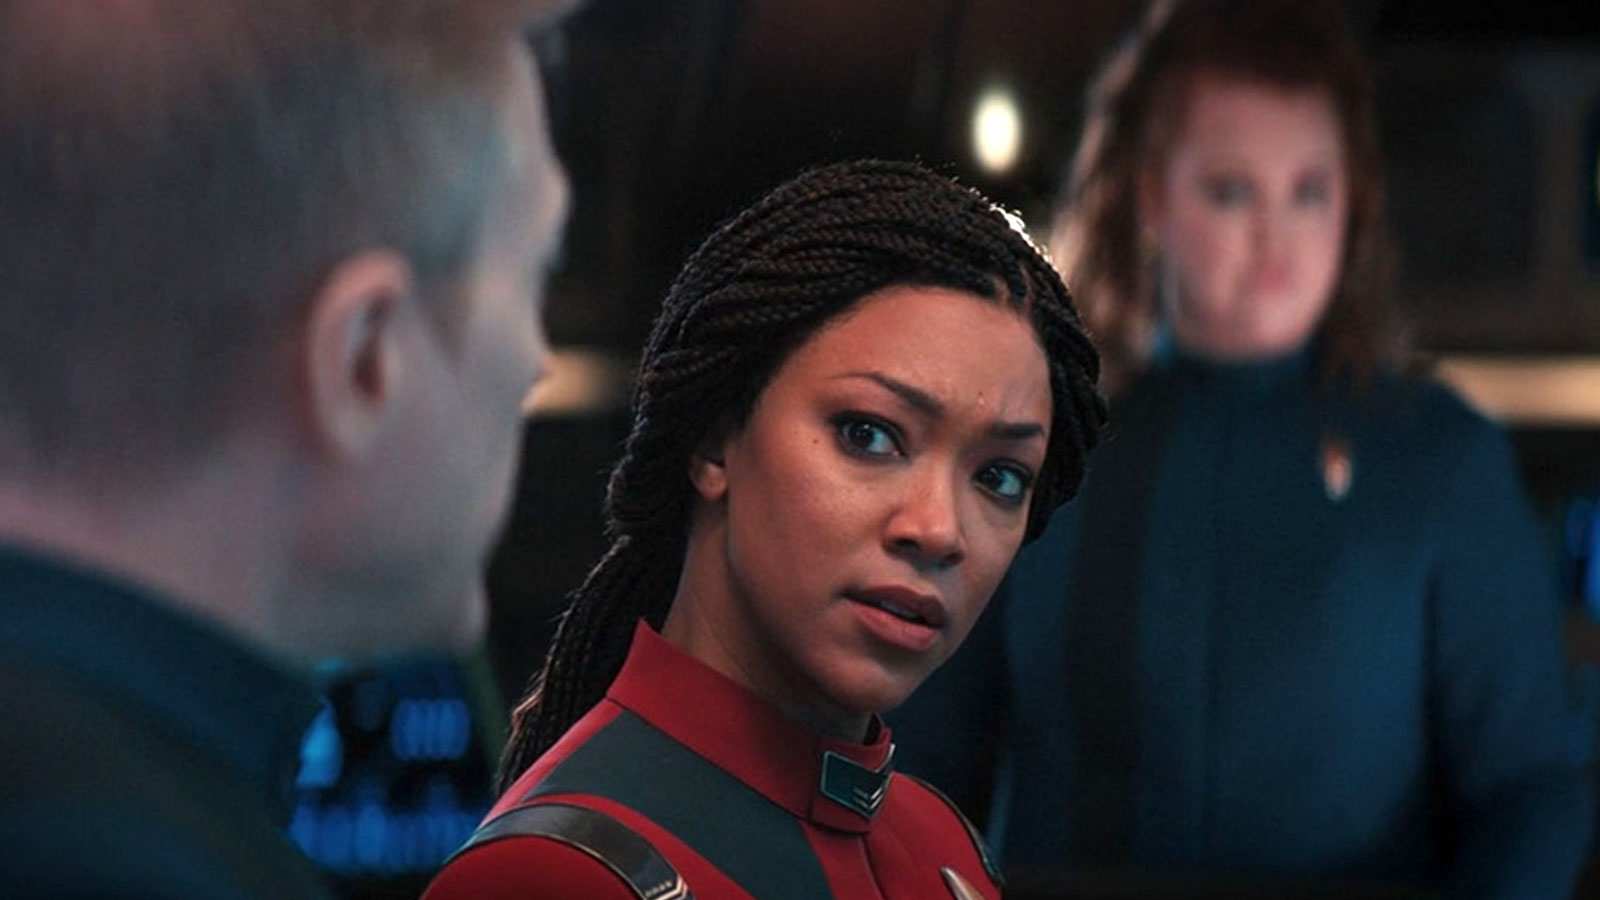 Star Trek: Discovery “Anomaly” Review: What Is Star Trek If Not An Analogy?